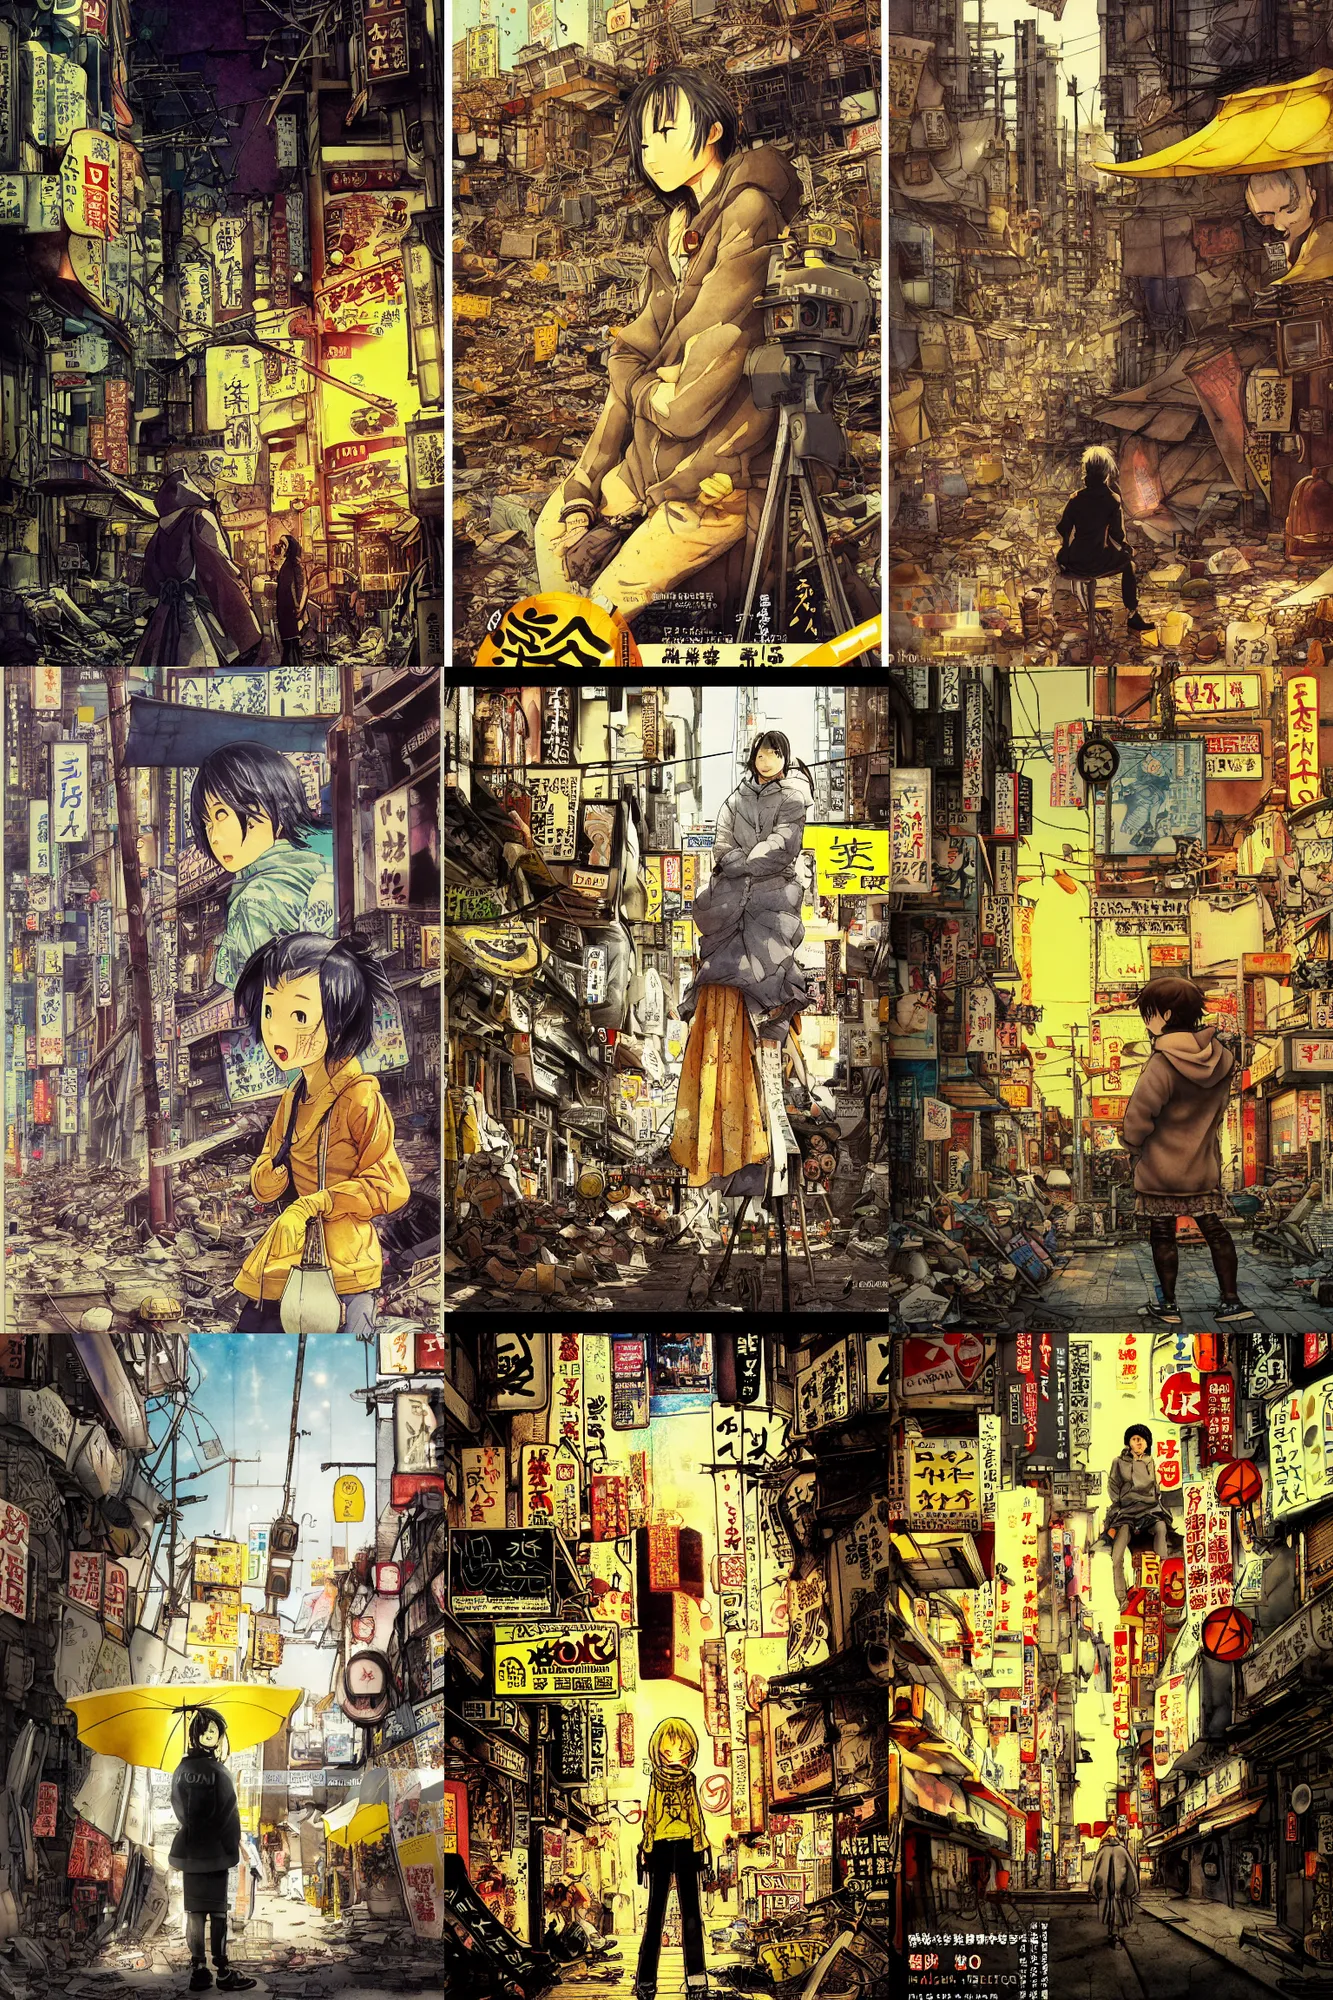 Prompt: tatsuyuki tanaka movie poster, genius party, shinjuku, koji morimoto, katsuya terada, masamune shirow, tatsuyuki tanaka, golden hour lighting,detailed watercolor, paper texture, movie scene, distant shot of hoody girl side view sitting under a yellow striped parasol in deserted dusty shinjuku junk town, old pawn shop, bright sun bleached ground ,scary chameleon face muscle robot monster lurks in the background, ghost mask, teeth, animatronic, black smoke, pale beige sky, junk tv, texture, strange, impossible, fur, spines, mouth, pipe brain, shell, brown mud, dust, bored expression, overhead wires, telephone pole, dusty, dry, pencil marks, hd, 4k, remaster, dynamic camera angle, deep 3 point perspective, fish eye, dynamic scene